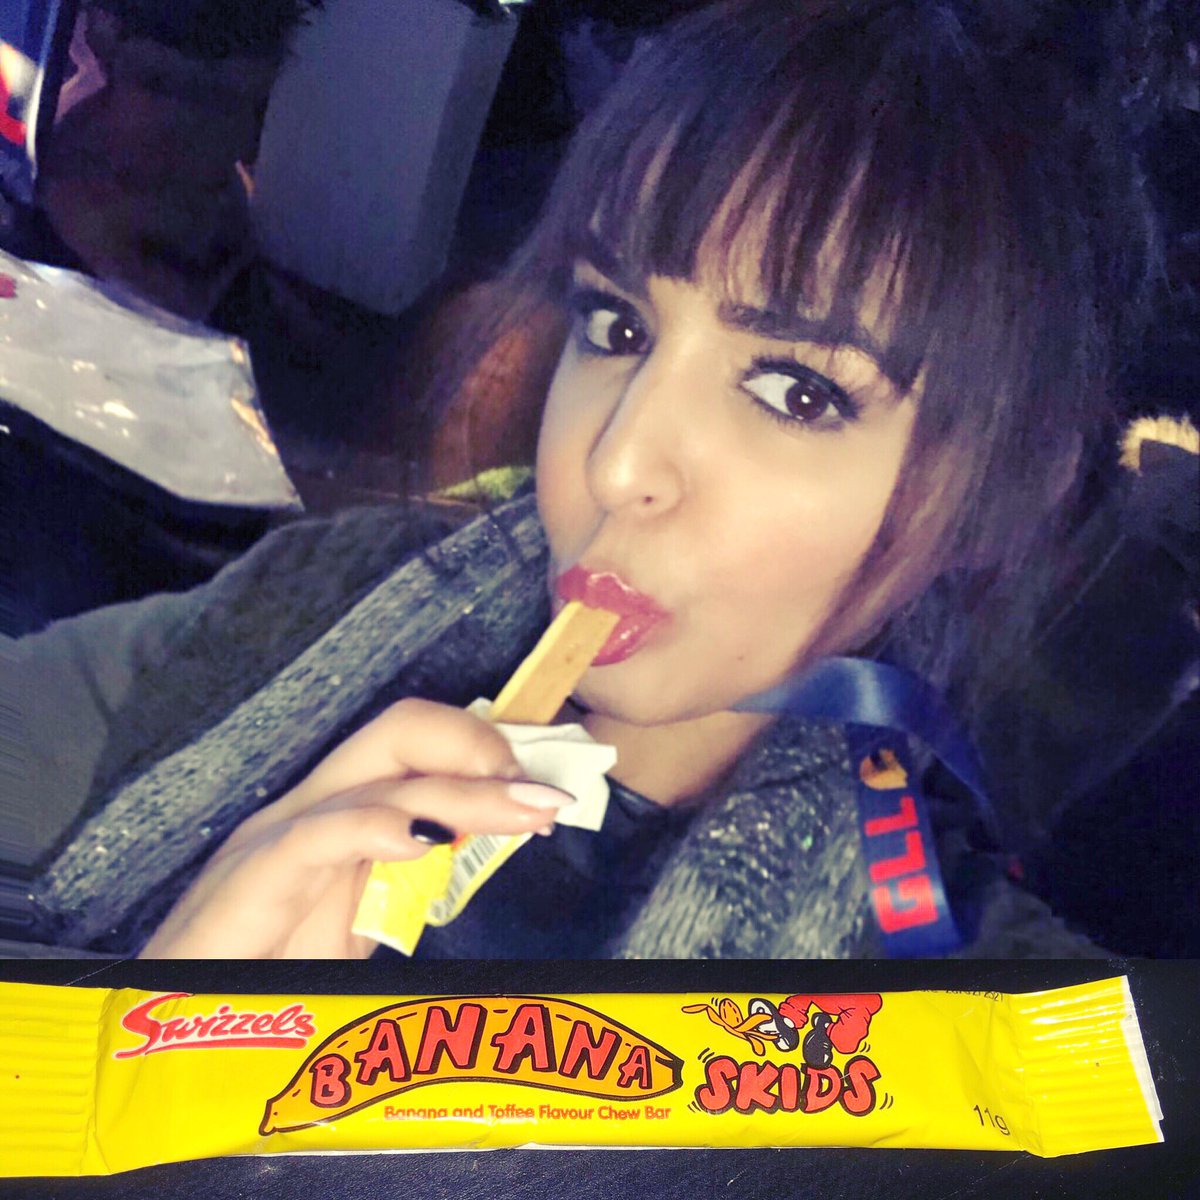 Backstage @globallootleague trying some Swedish sweeties “banana skids” banana and toffee yummy ???? very chewy ???? https://t.co/QrWGnqdVgu